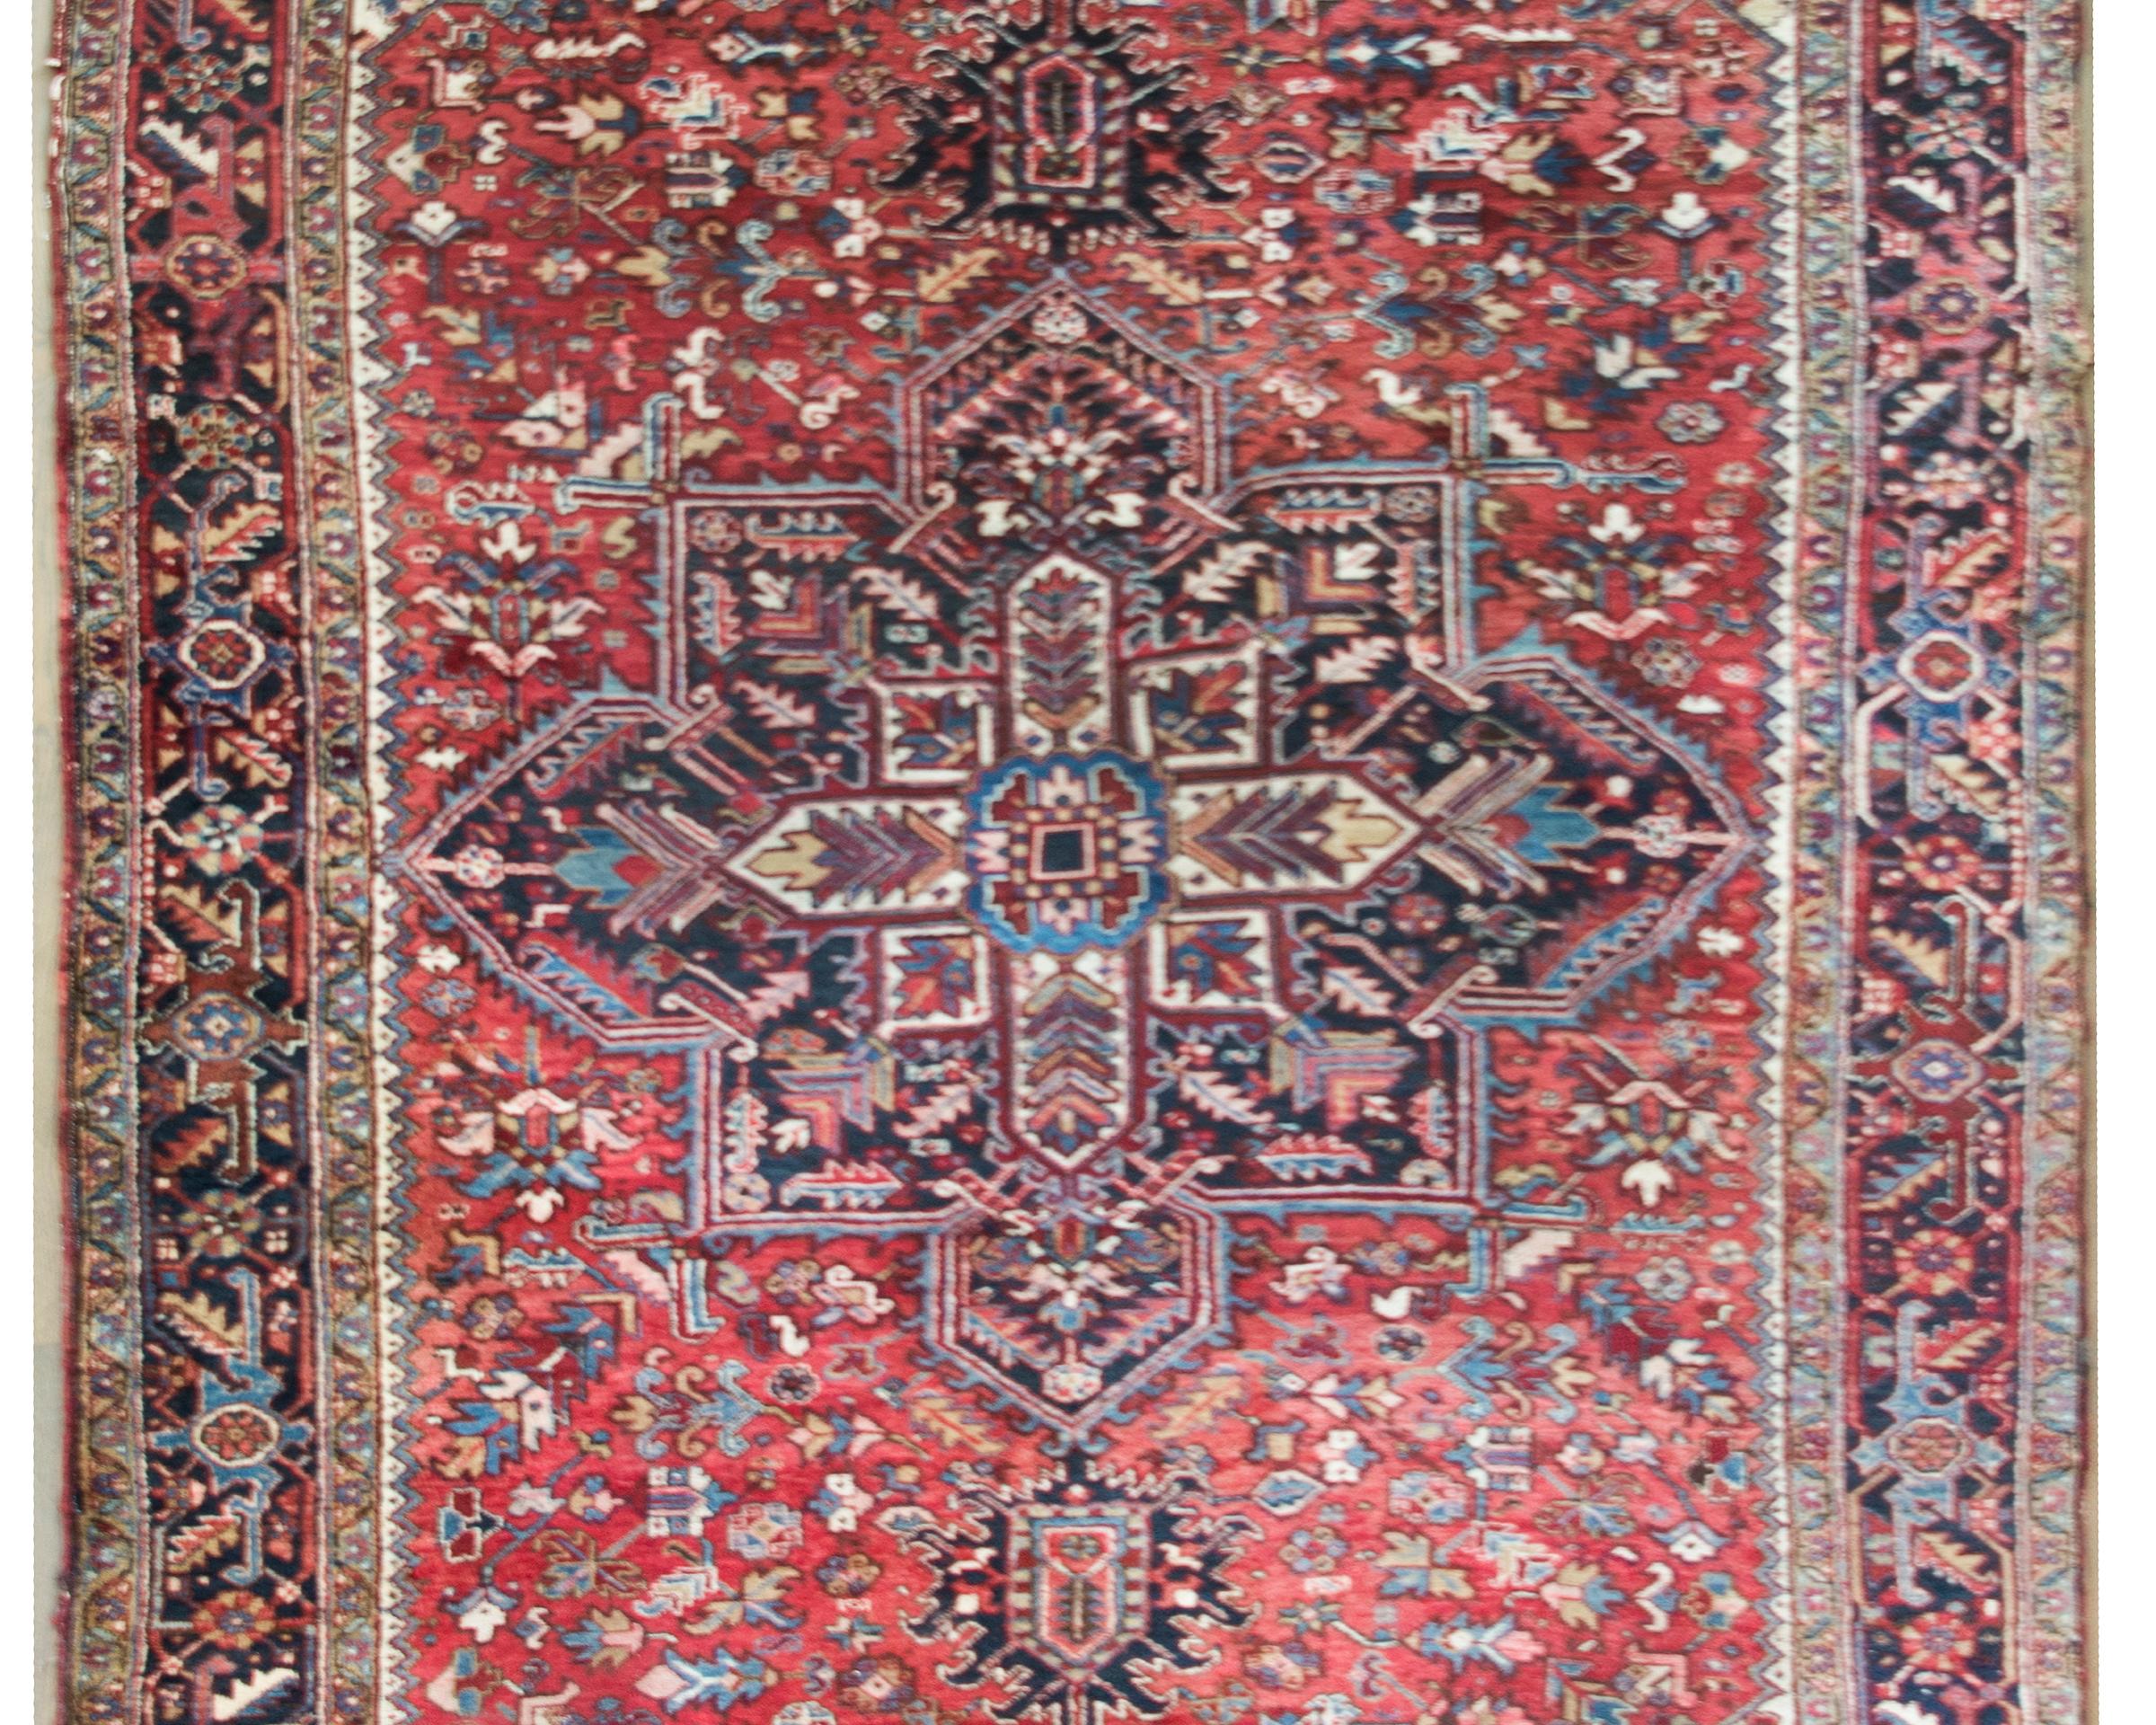 A fantastic large-scale early 20th century Persian Heriz rug with a large stylized central floral medallion woven with an intricate floral and leave pattern, and living admits a field of even more stylized flowers and leaves, and all woven in